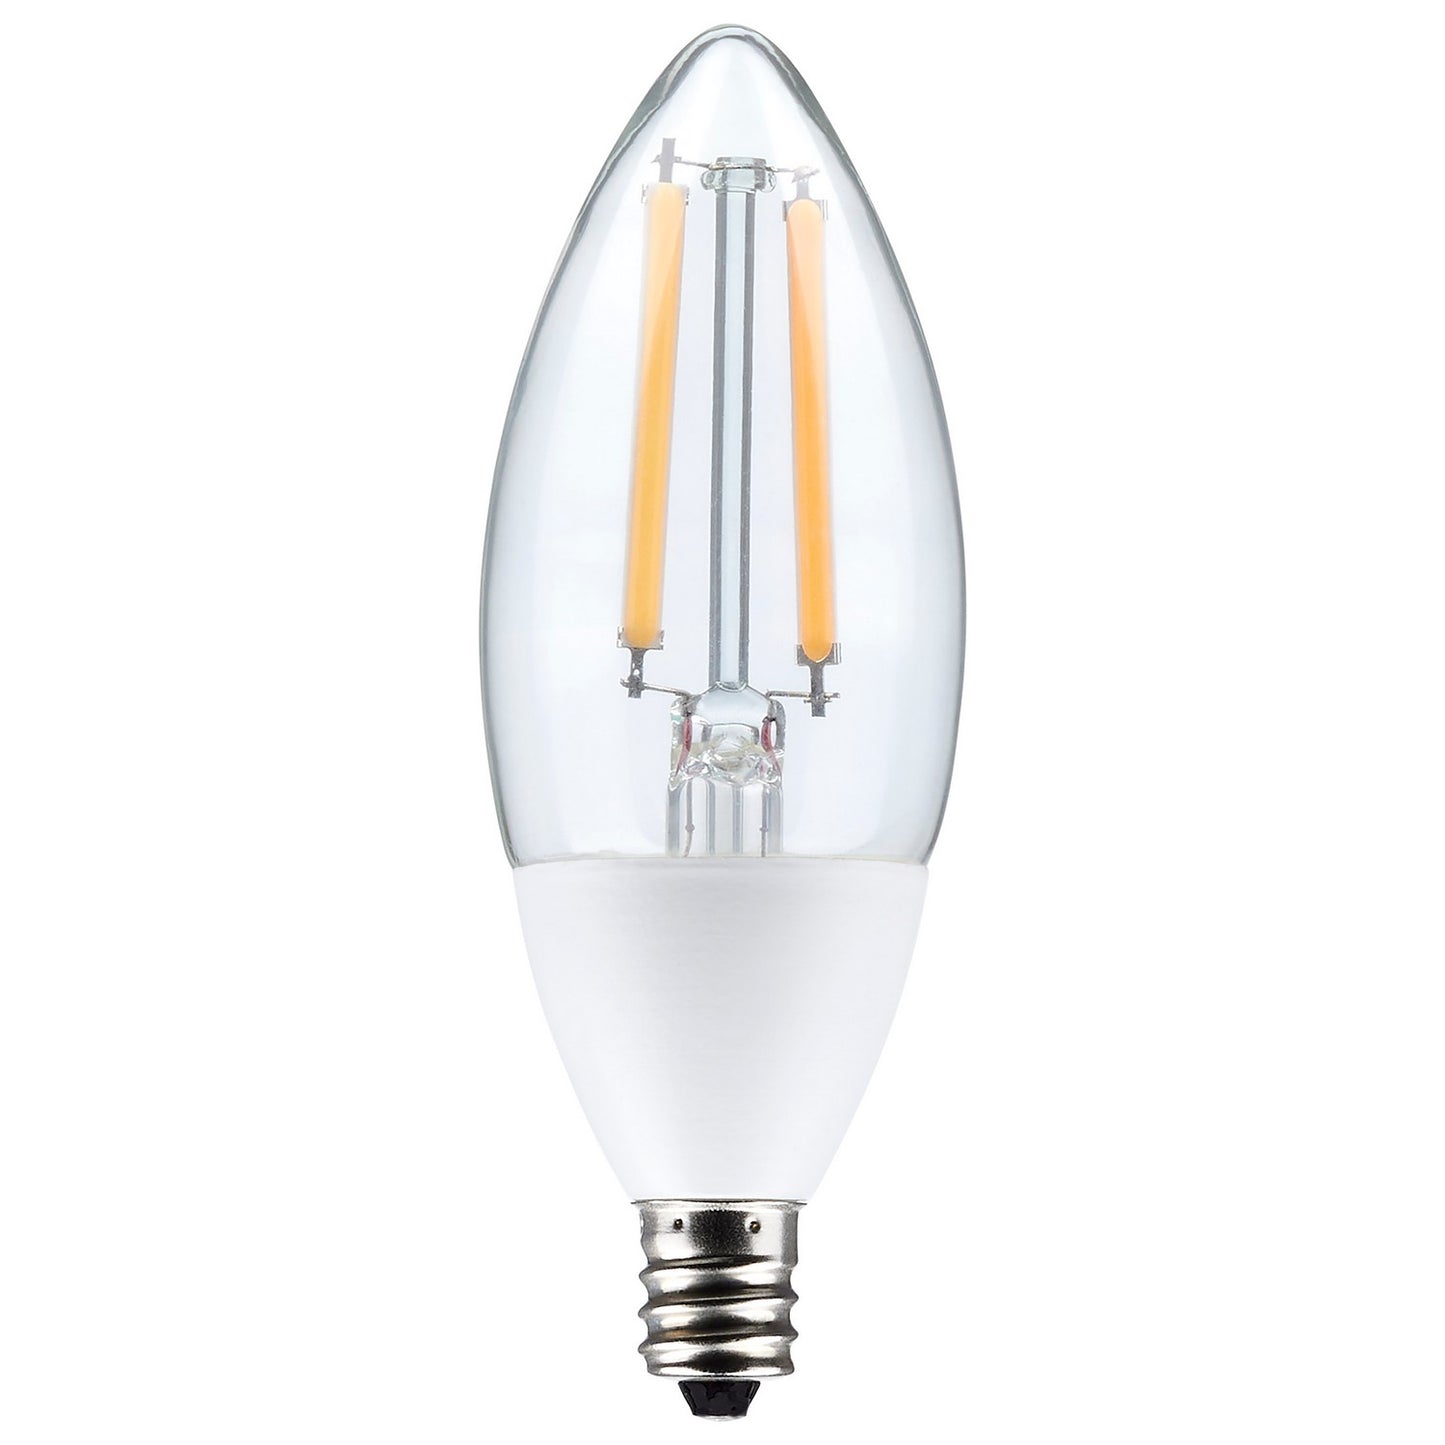 Light Bulb by Satco in White Finish (S11478)